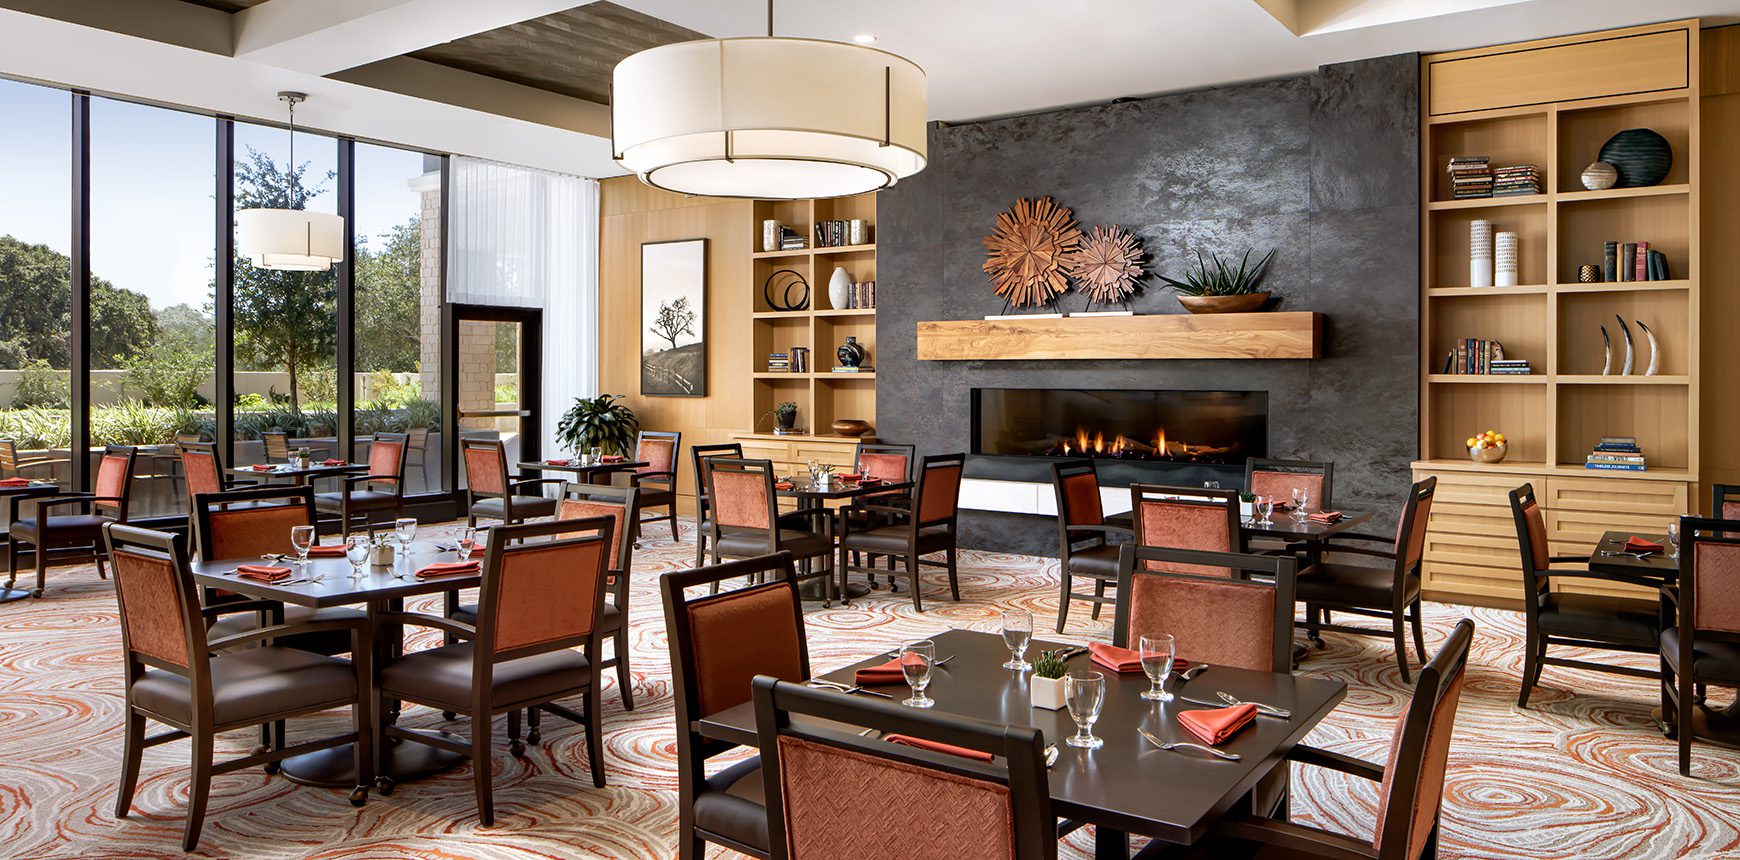 A cozy restaurant with a warm fireplace and neatly arranged tables, creating a welcoming ambiance.